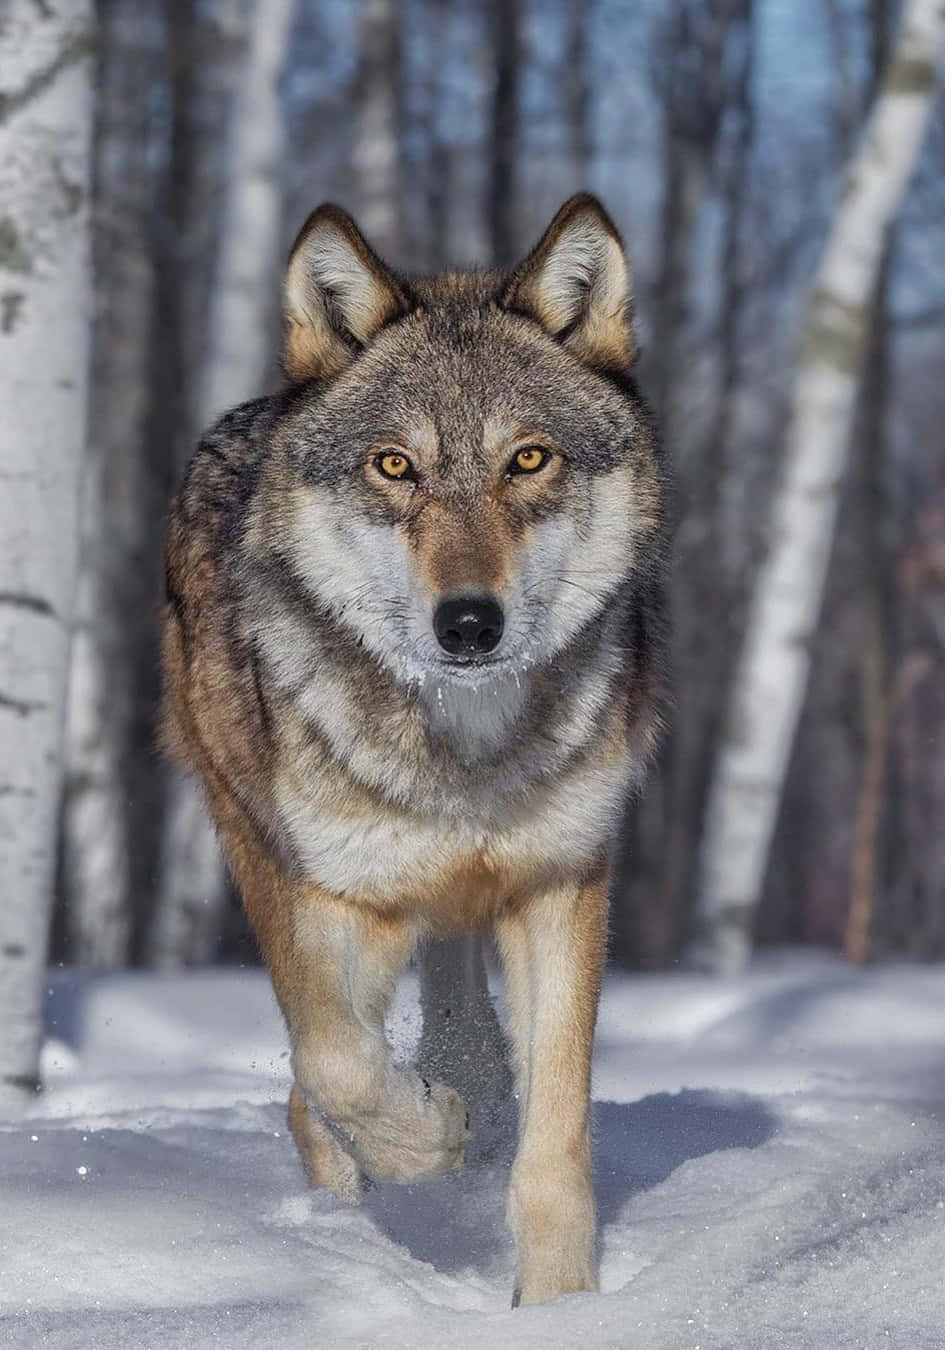 "The Majestic Wolf"